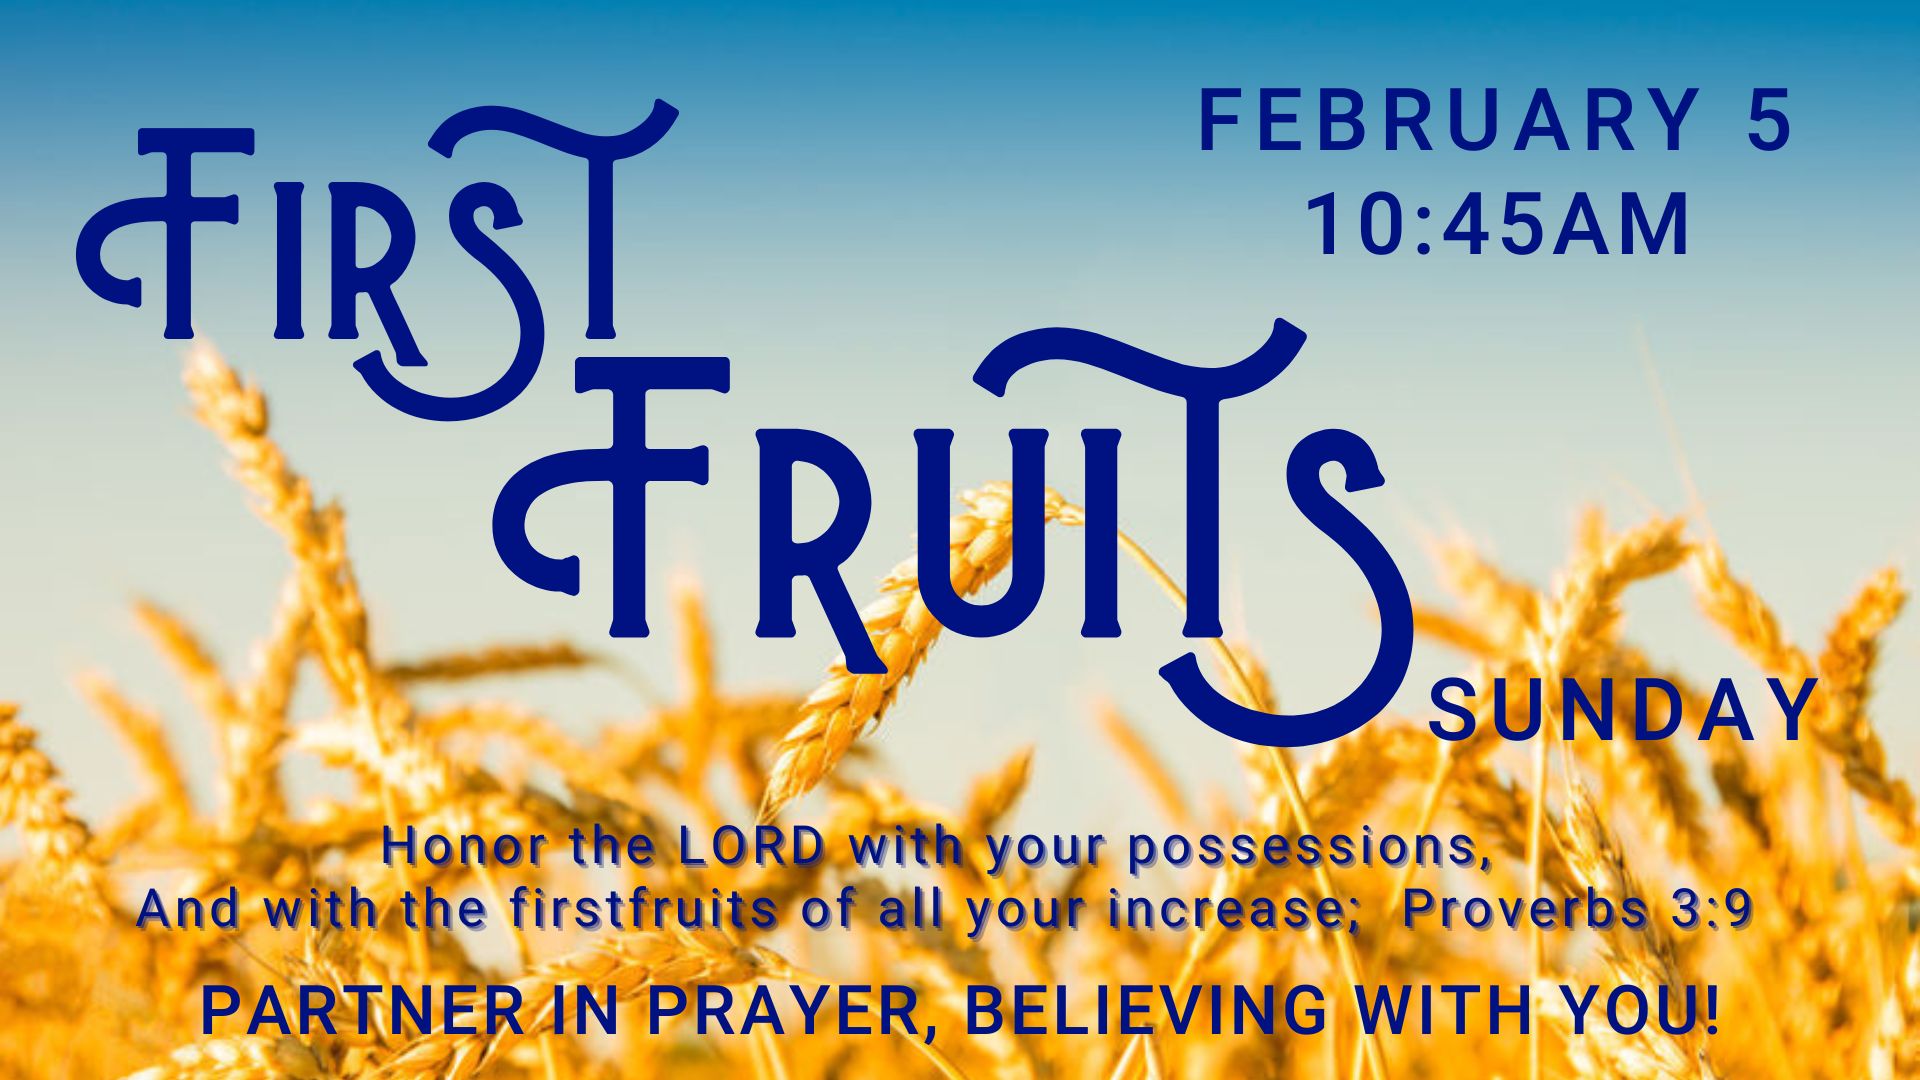 FIRST FRUITS SUNDAY